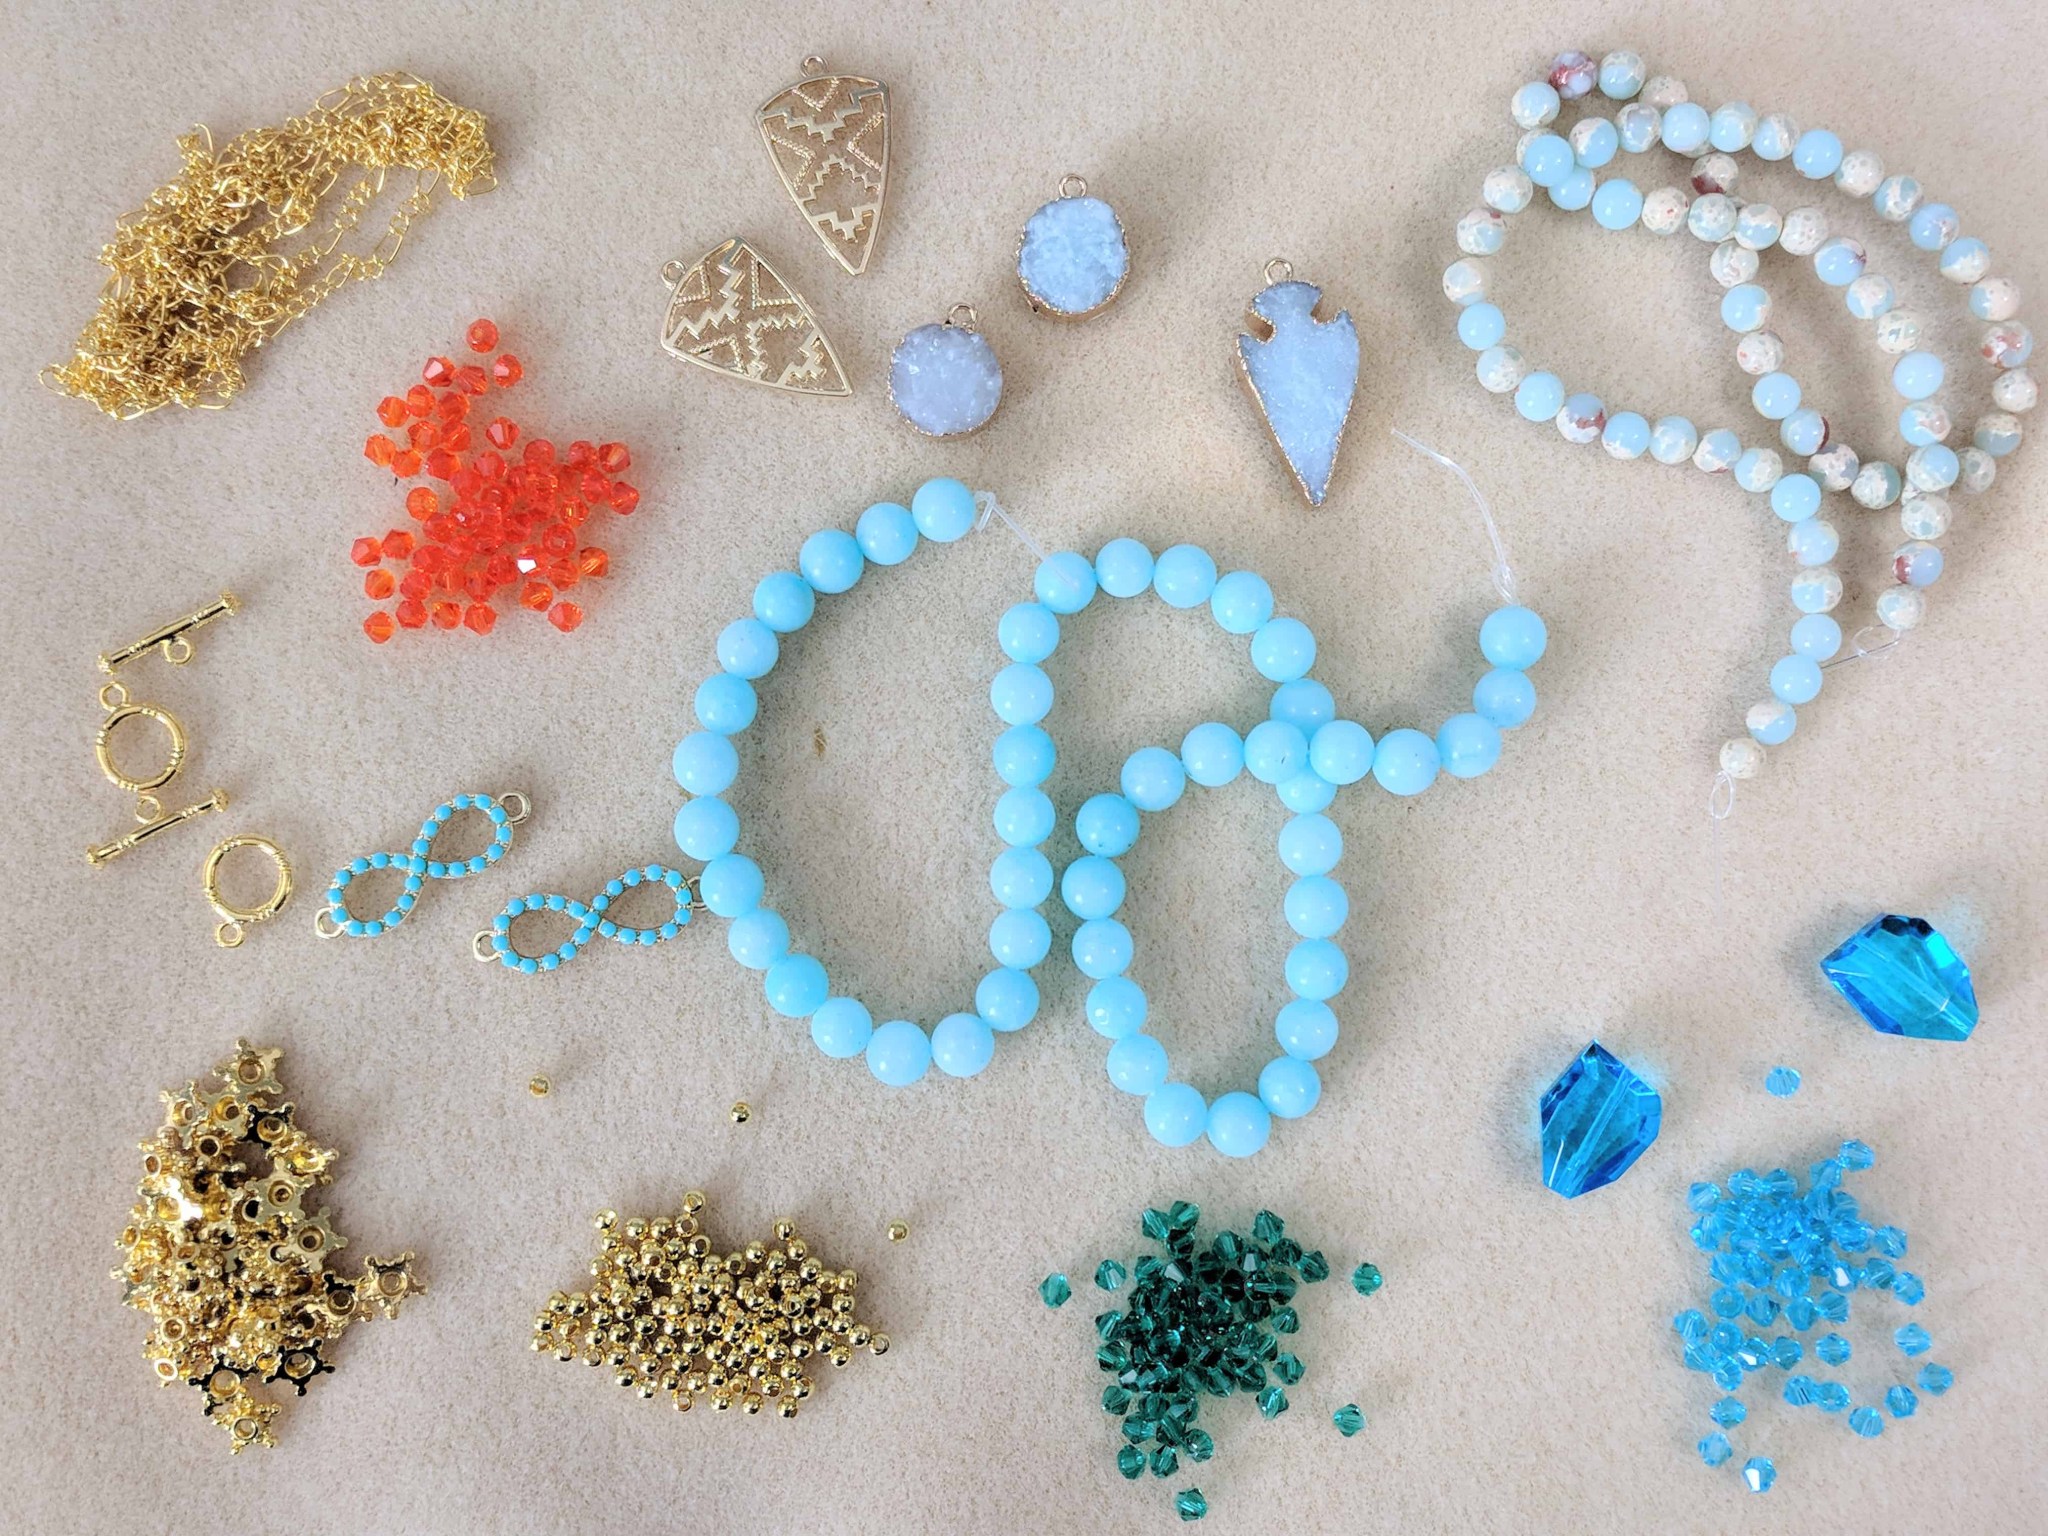 Bargain Bead Box Reviews: Get All The Details At Hello Subscription!